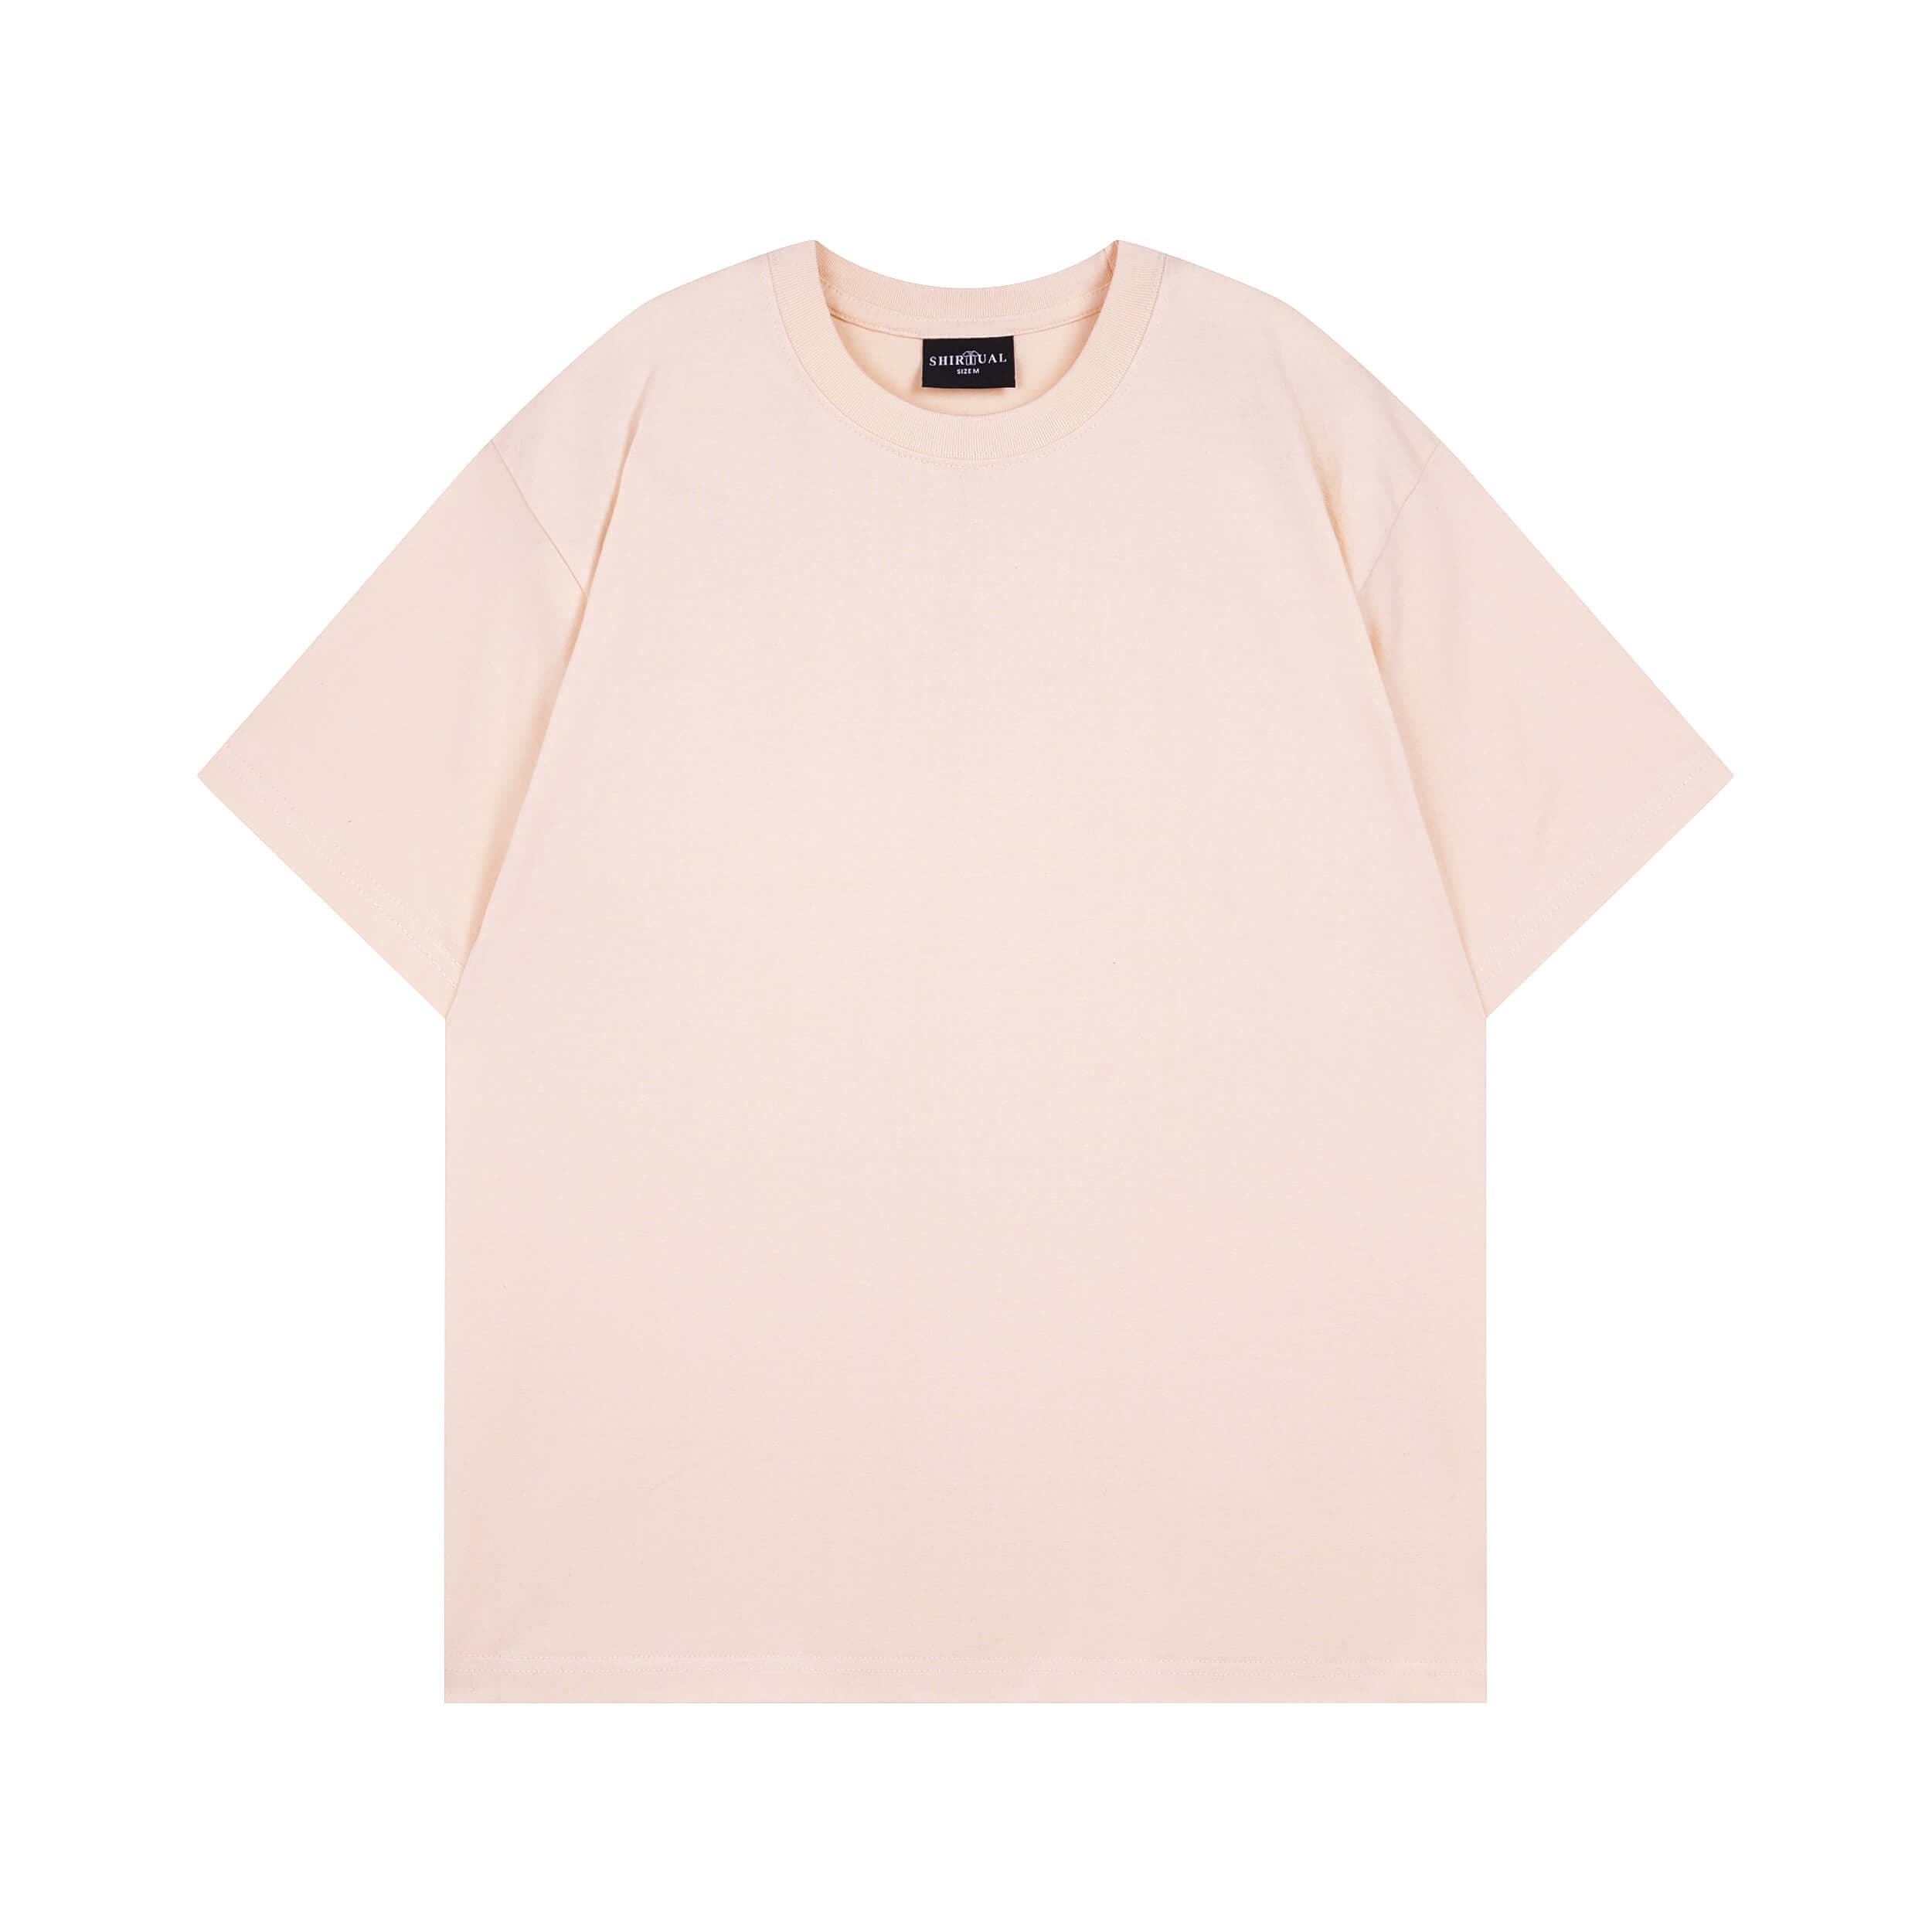 Oversized Tee 240GSM-white pink